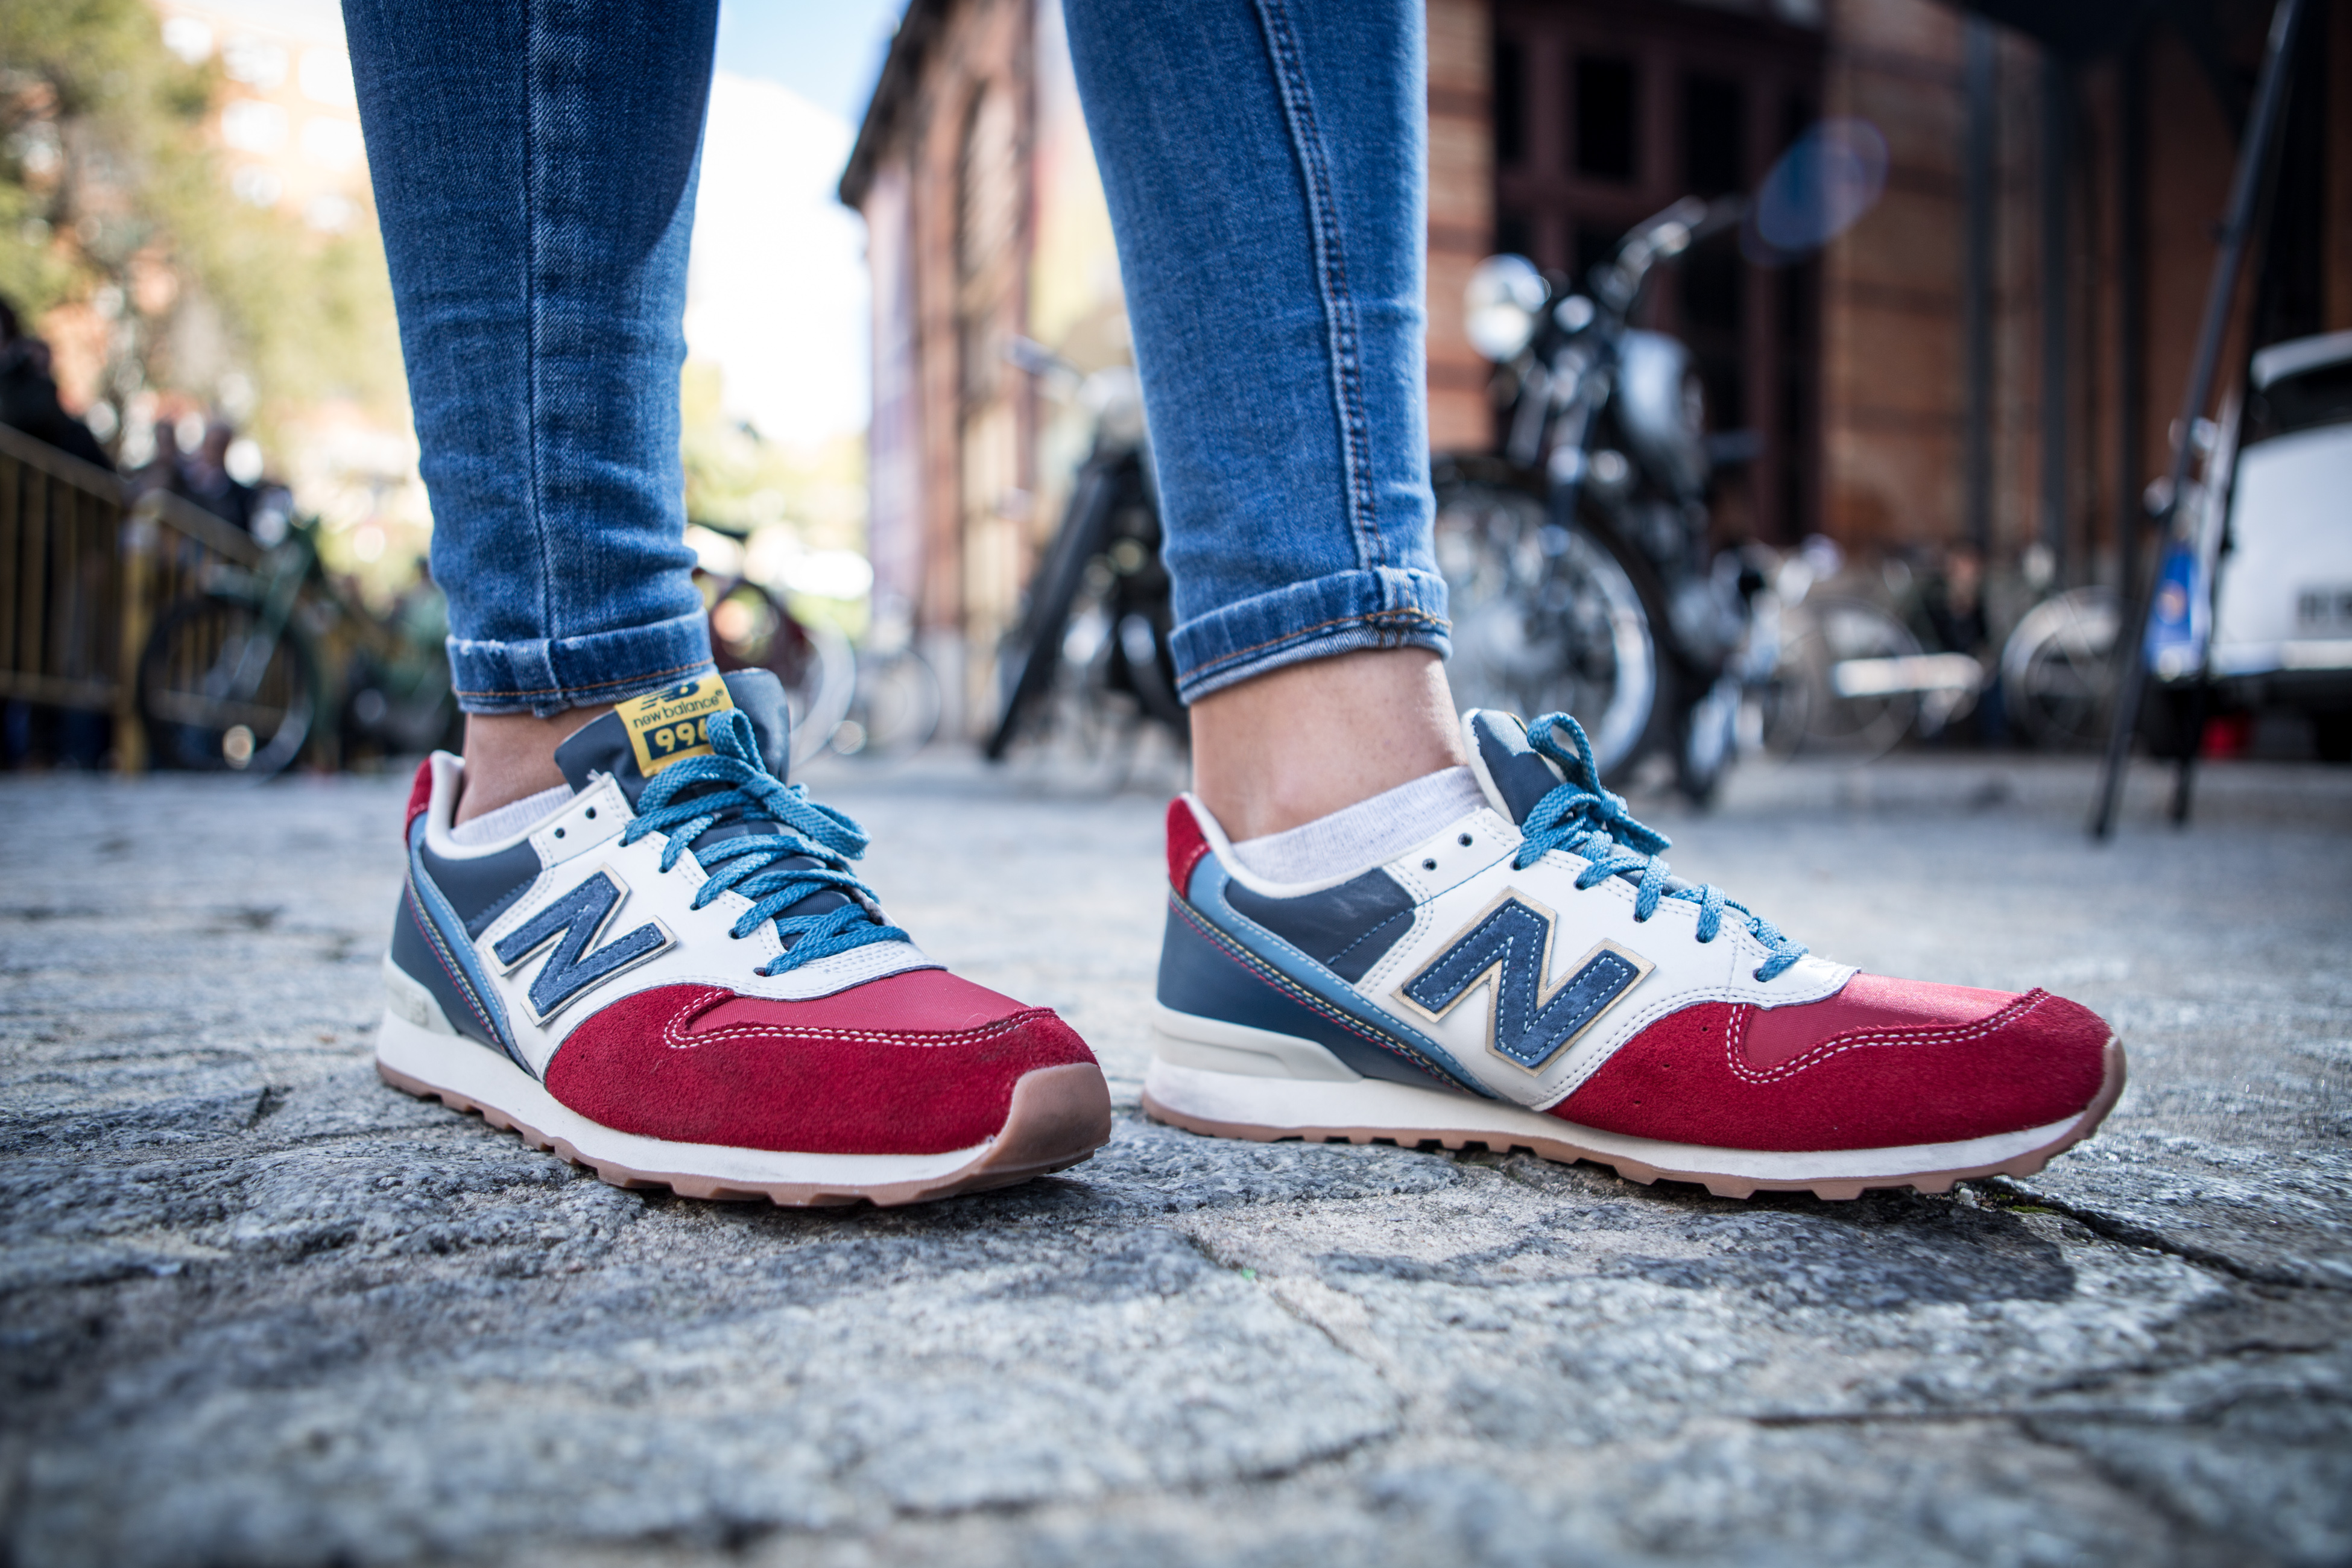 Here's why people are burning their New Balance